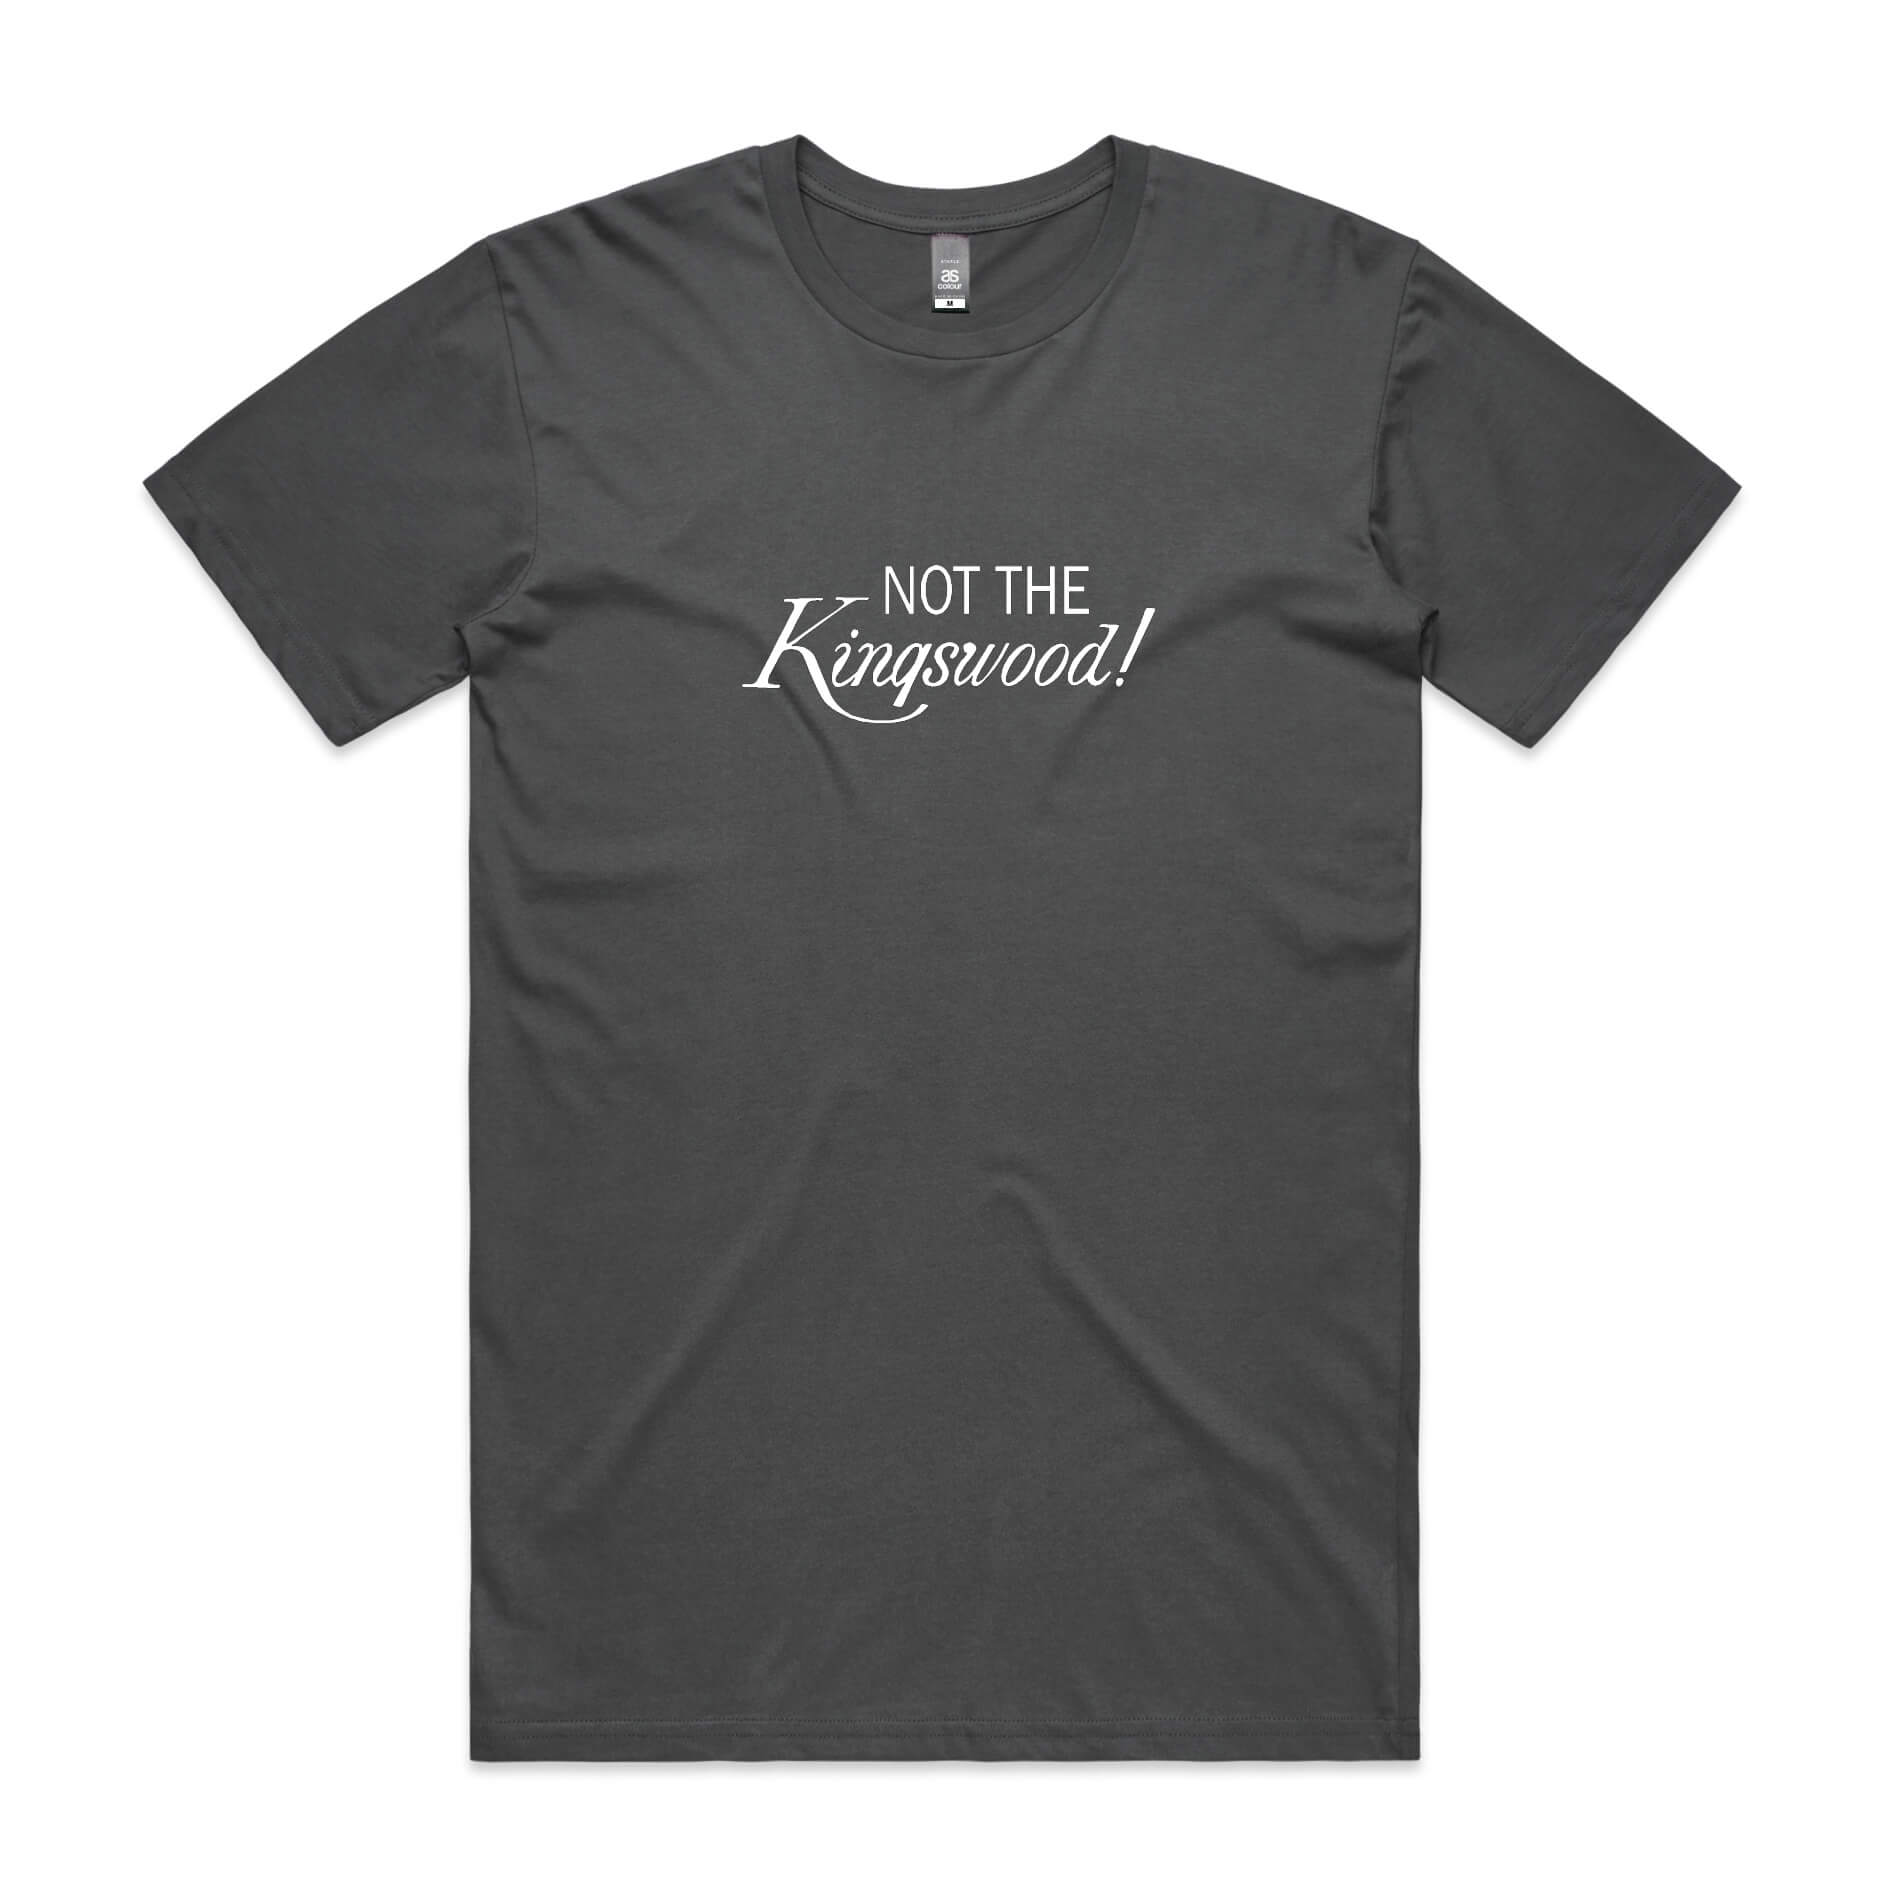 Not the Kingswood t-shirt in charcoal grey